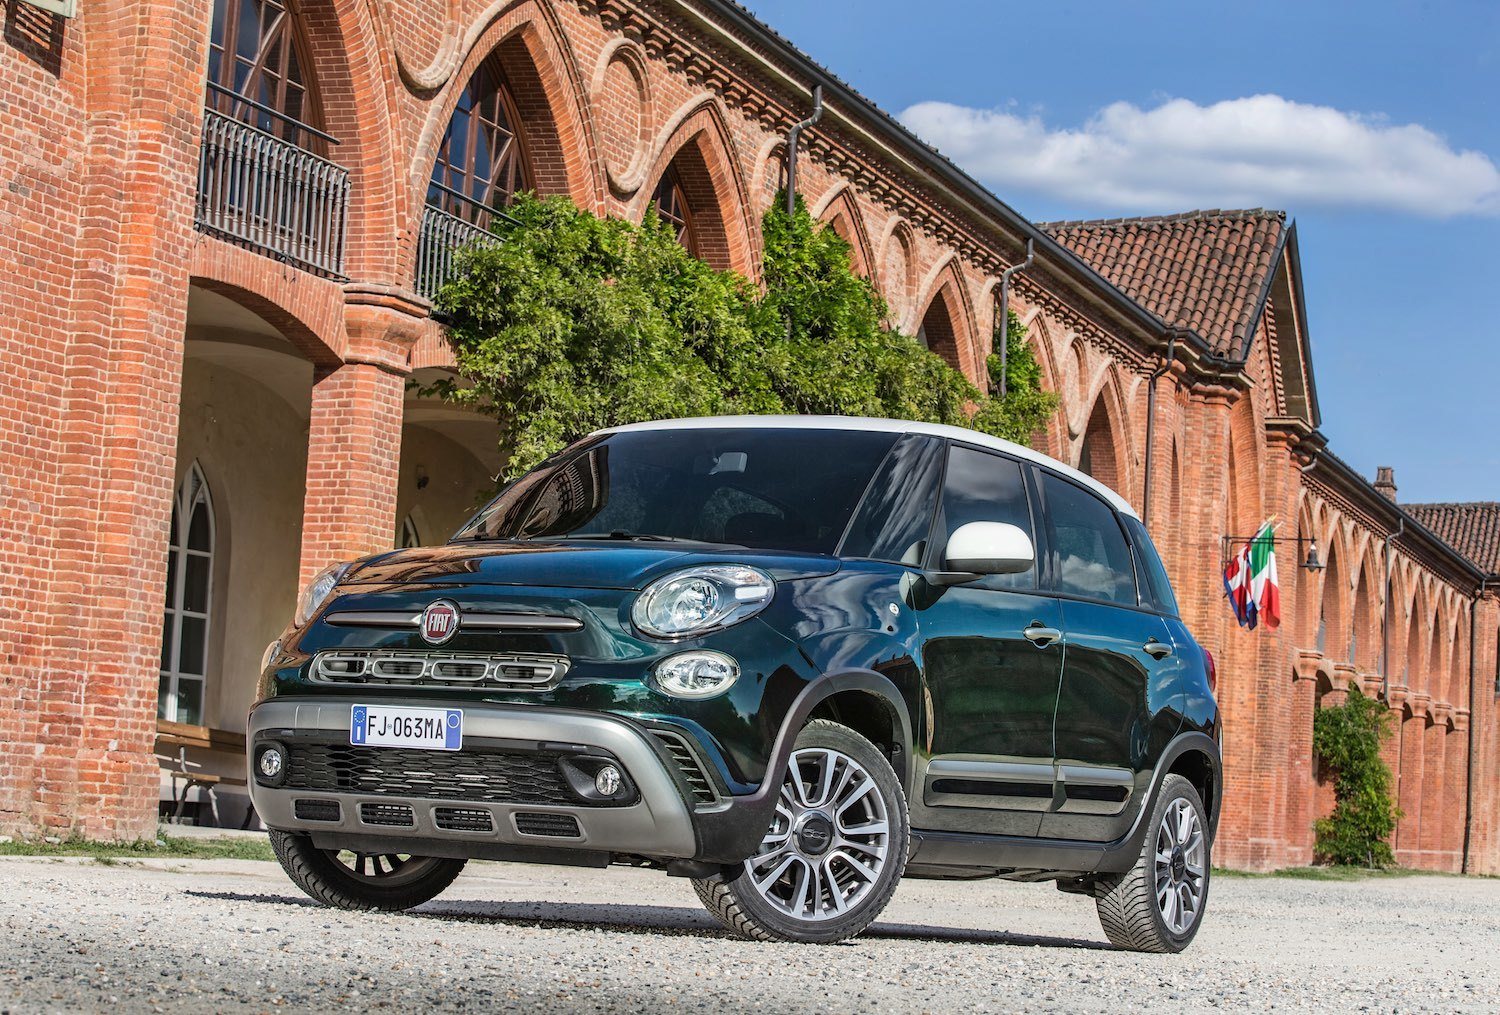 Tim Barnes-Clay reviews the New Fiat 500L from the first drive in Italy 4